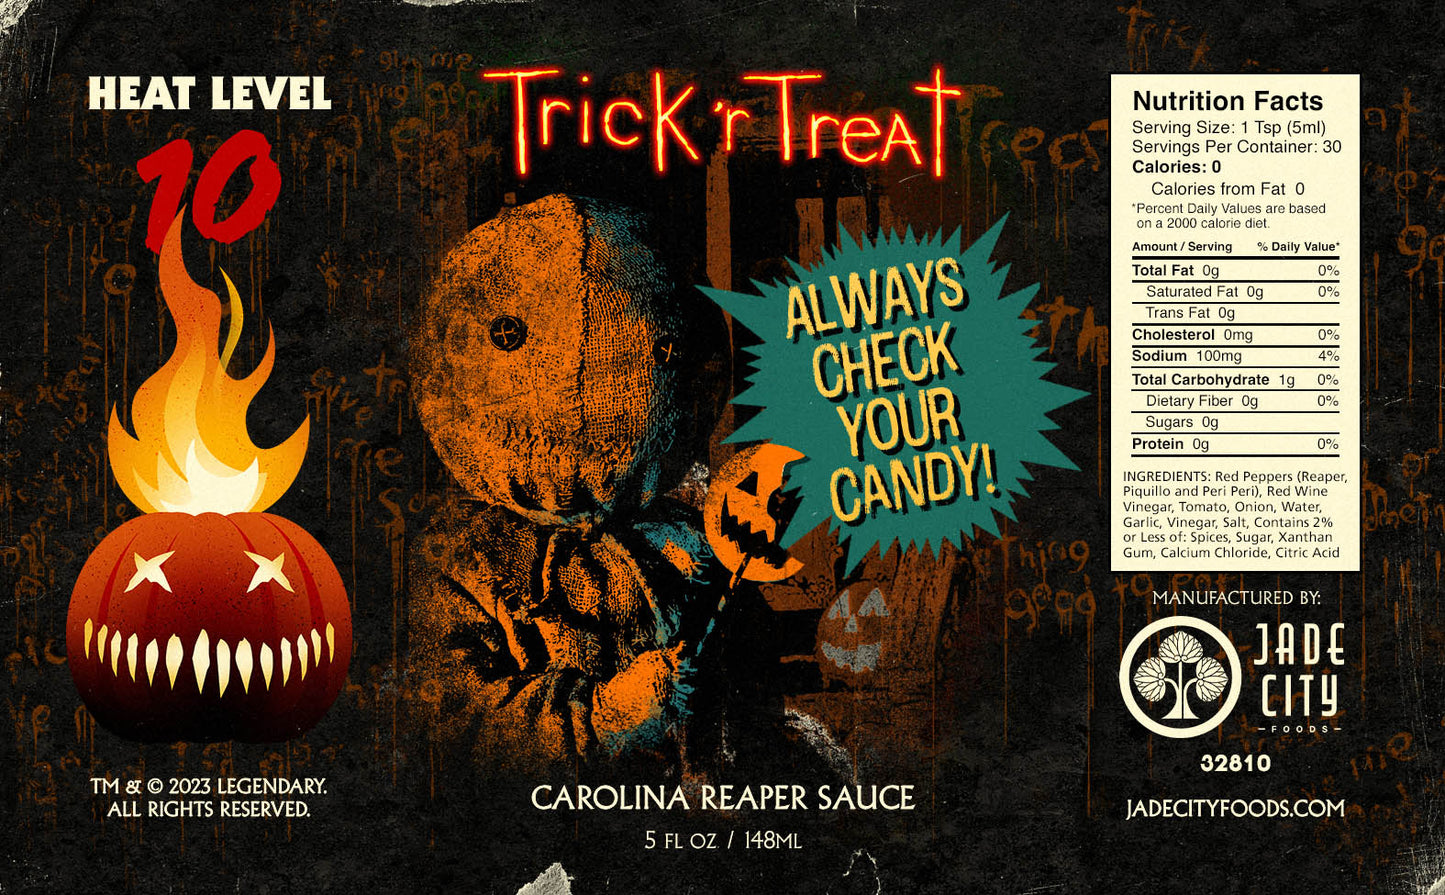 Always Check Your Candy! : Carolina Reaper Sauce